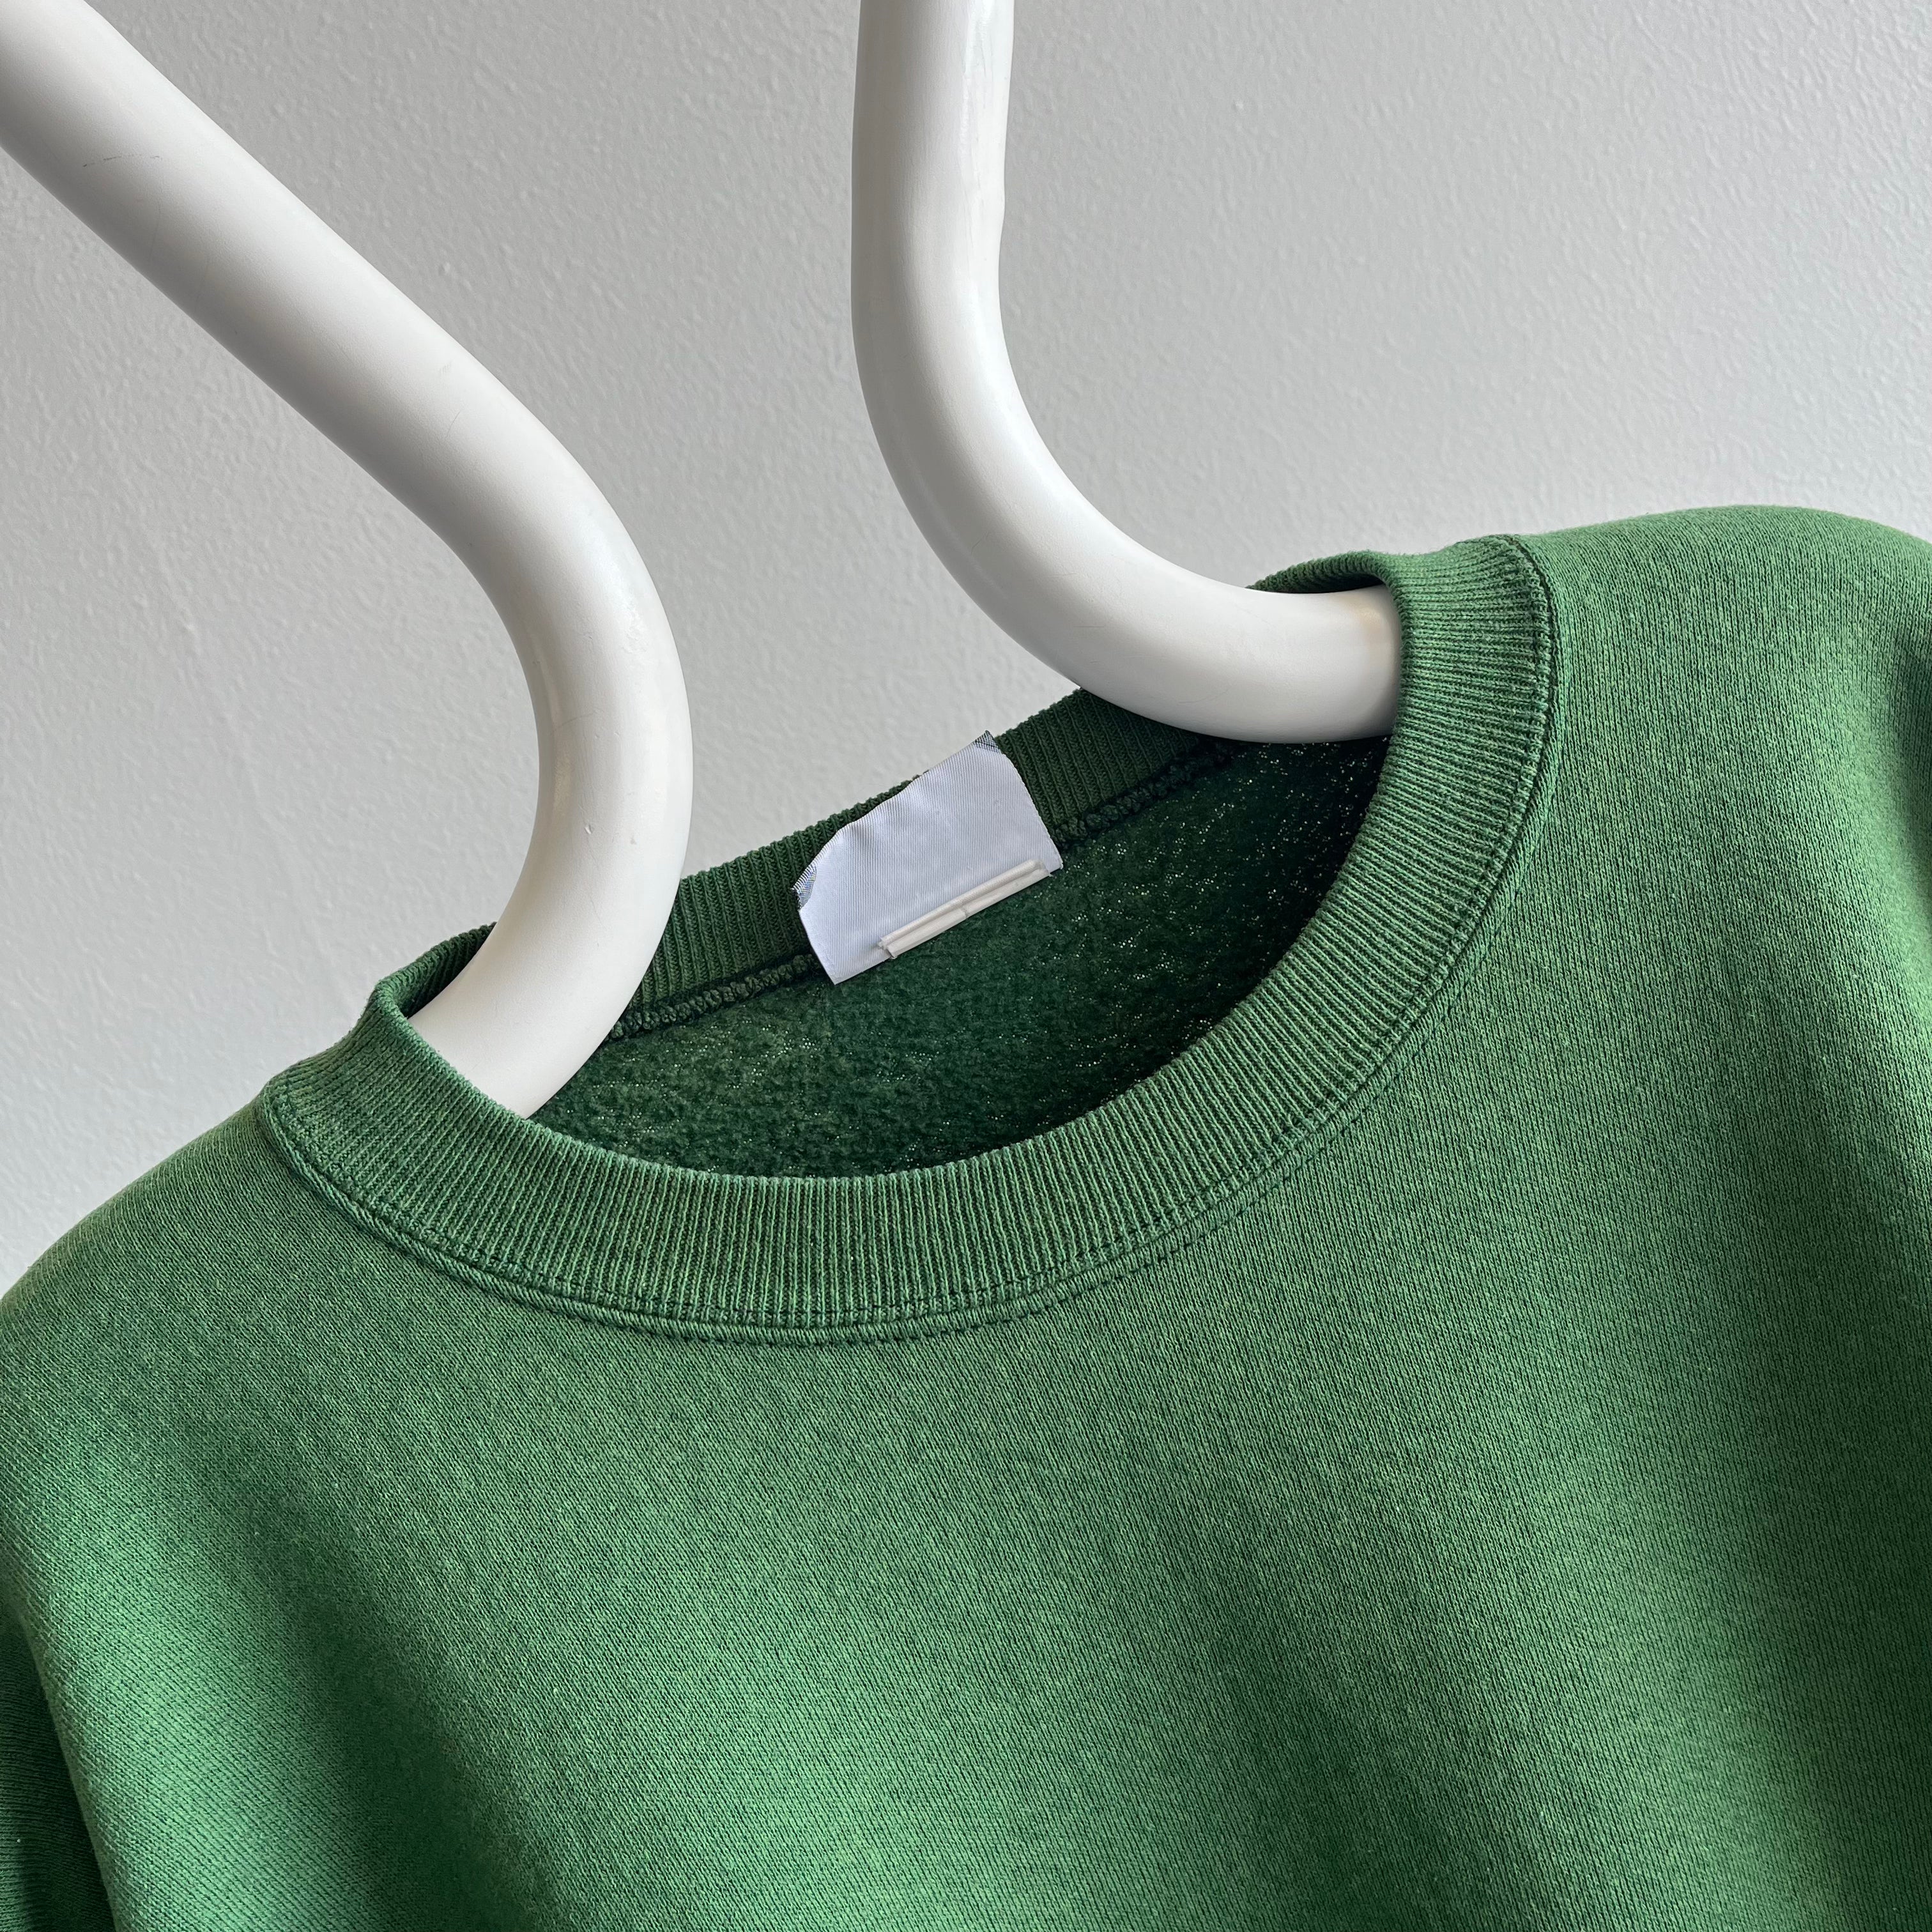 1980s Sun Faded To That Slightly Shiny Perfection Green Sweatshirt by Lee